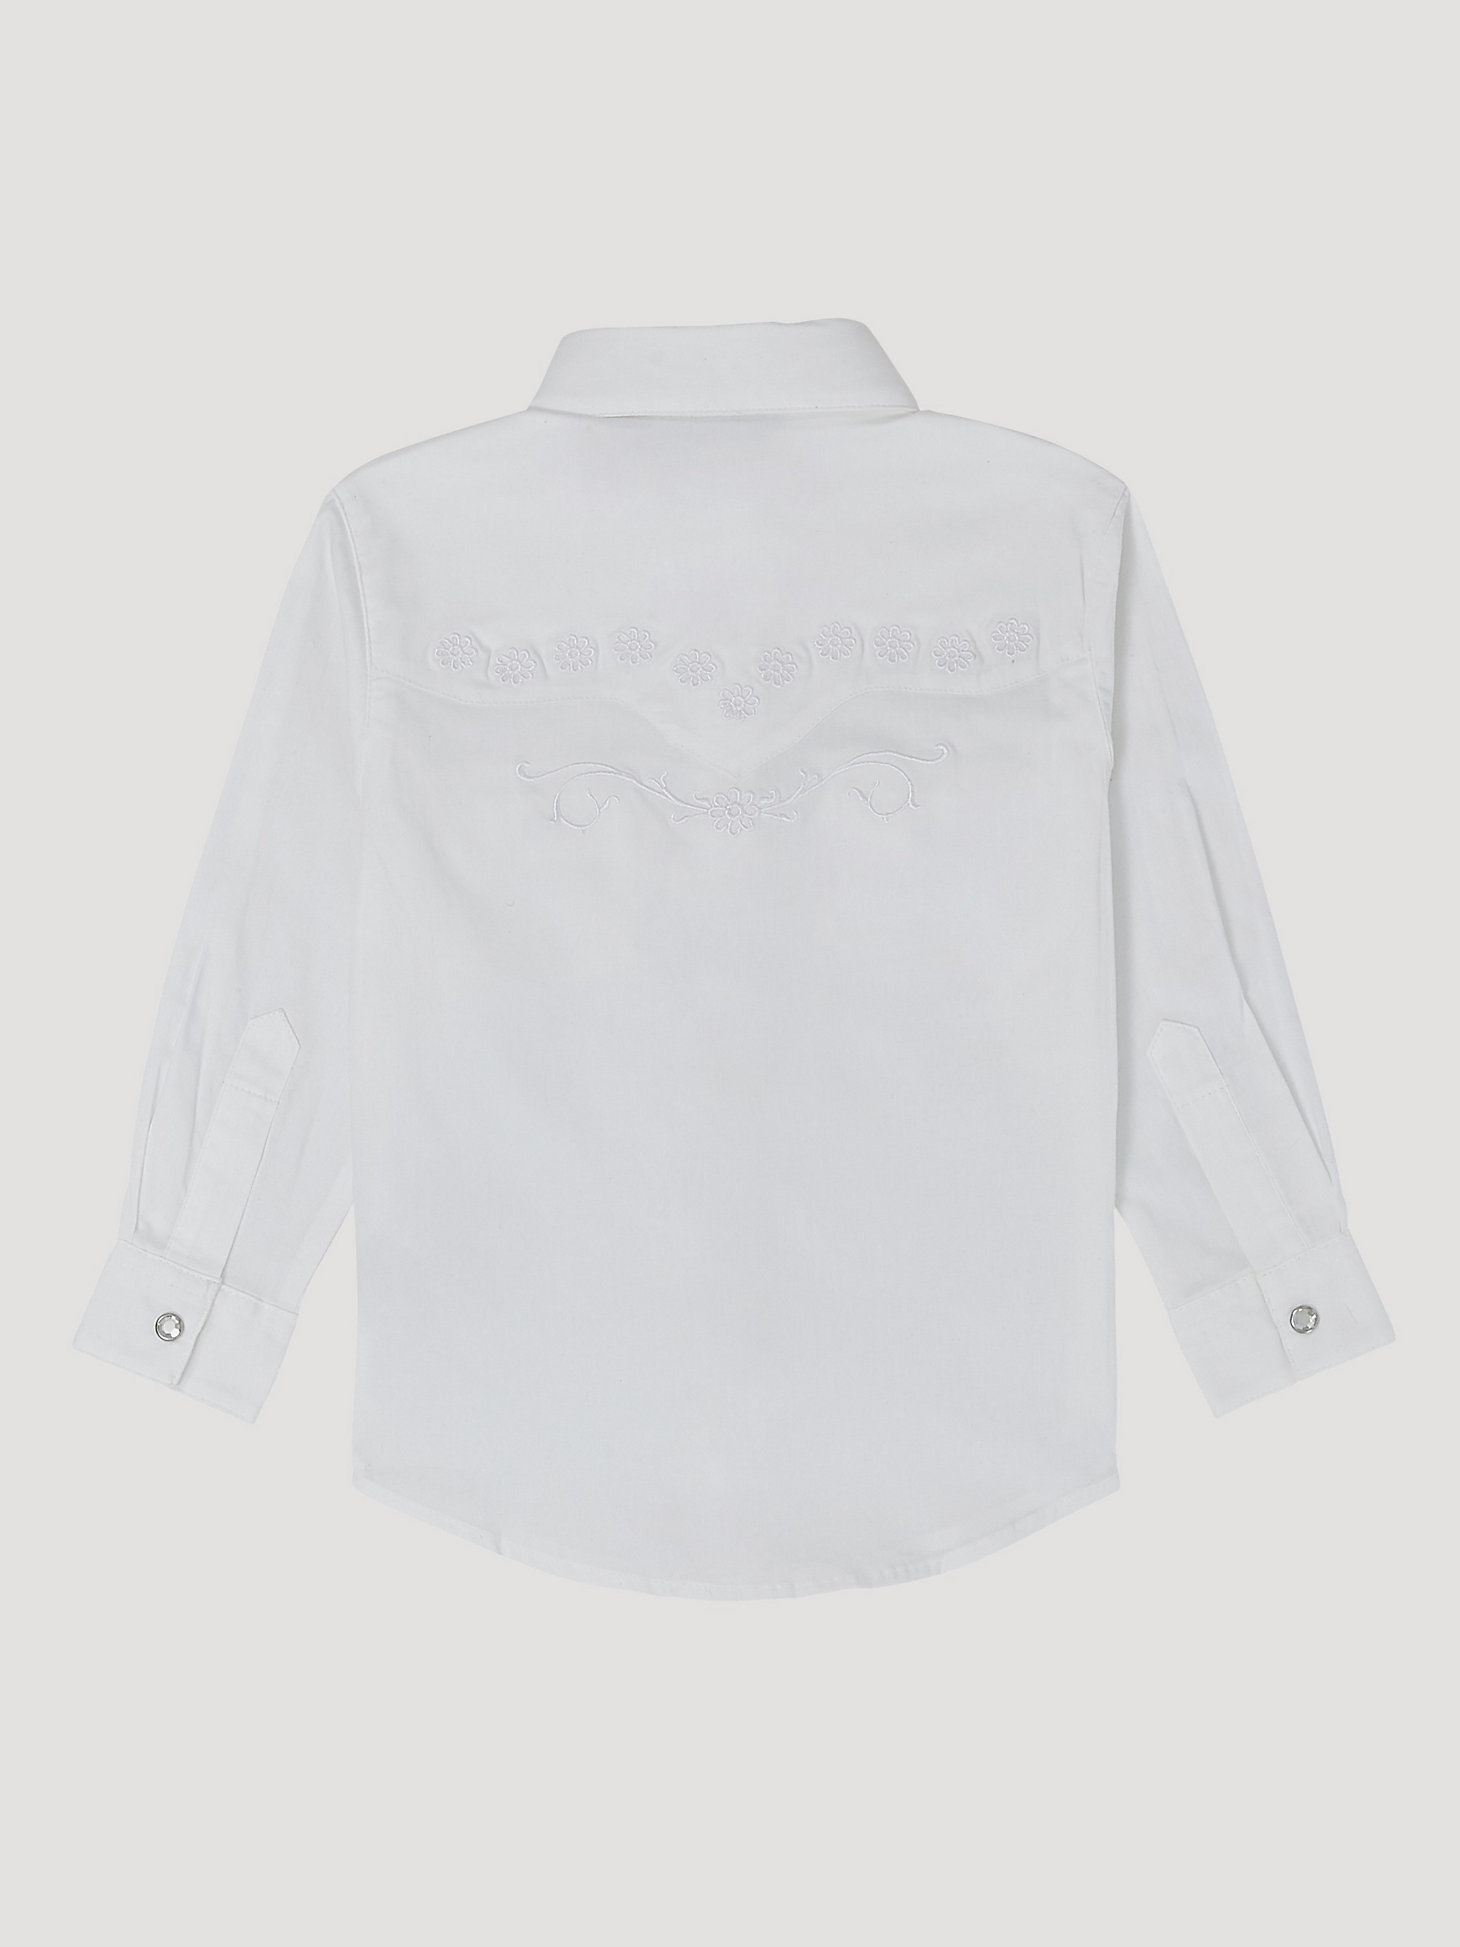 Girl’s Classic Long Sleeve Western Snap Shirt in White alternative view 1